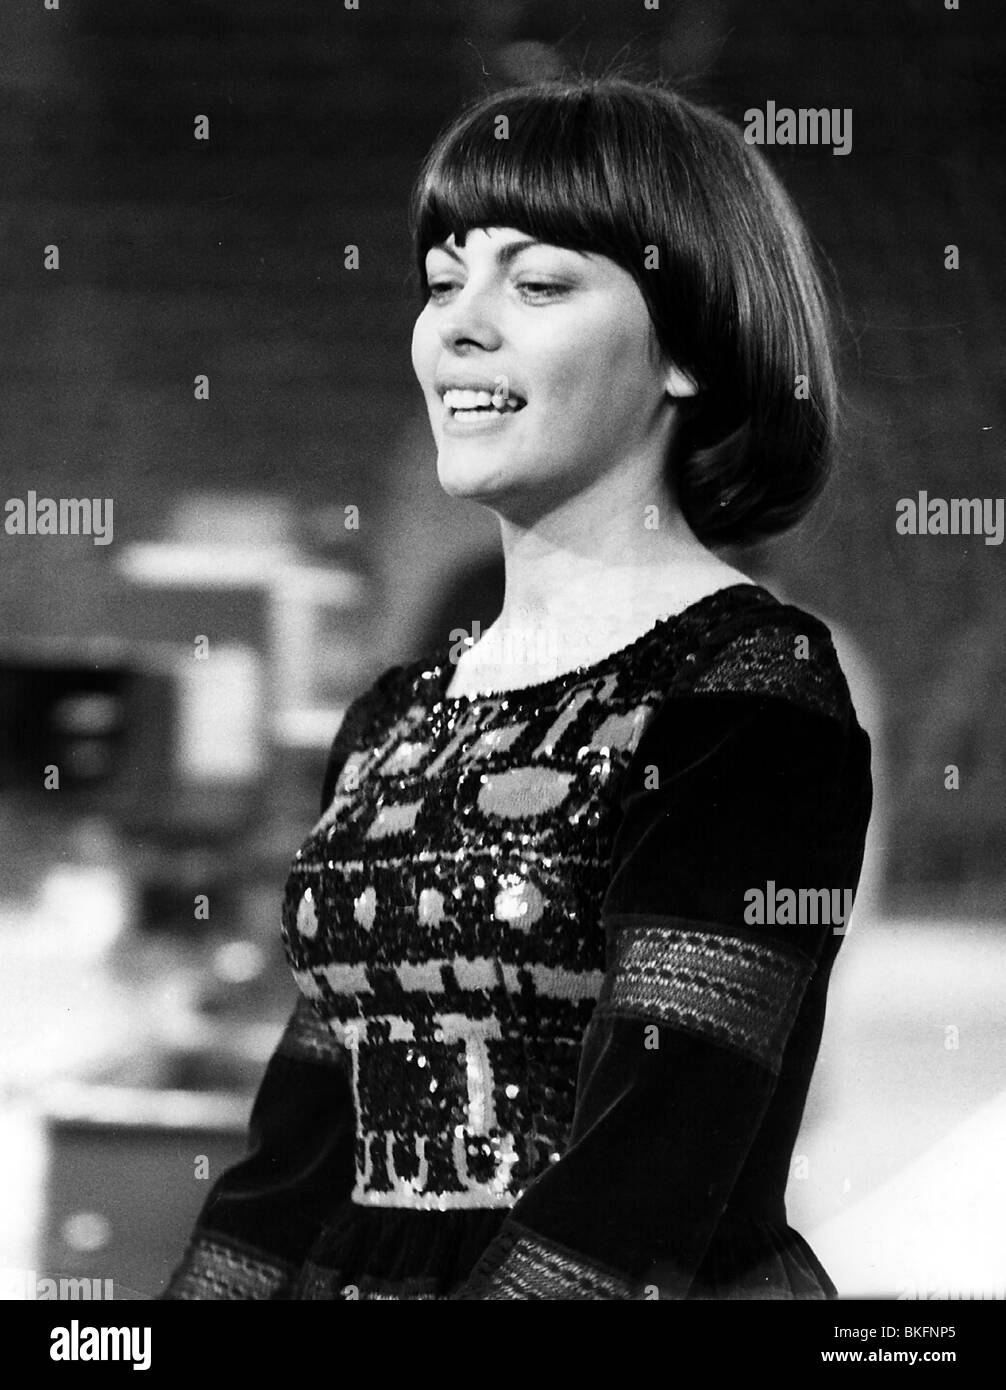 Mathieu, Mireille, * 22.7.1946, French singer, half length, during a show, 1970s, Stock Photo